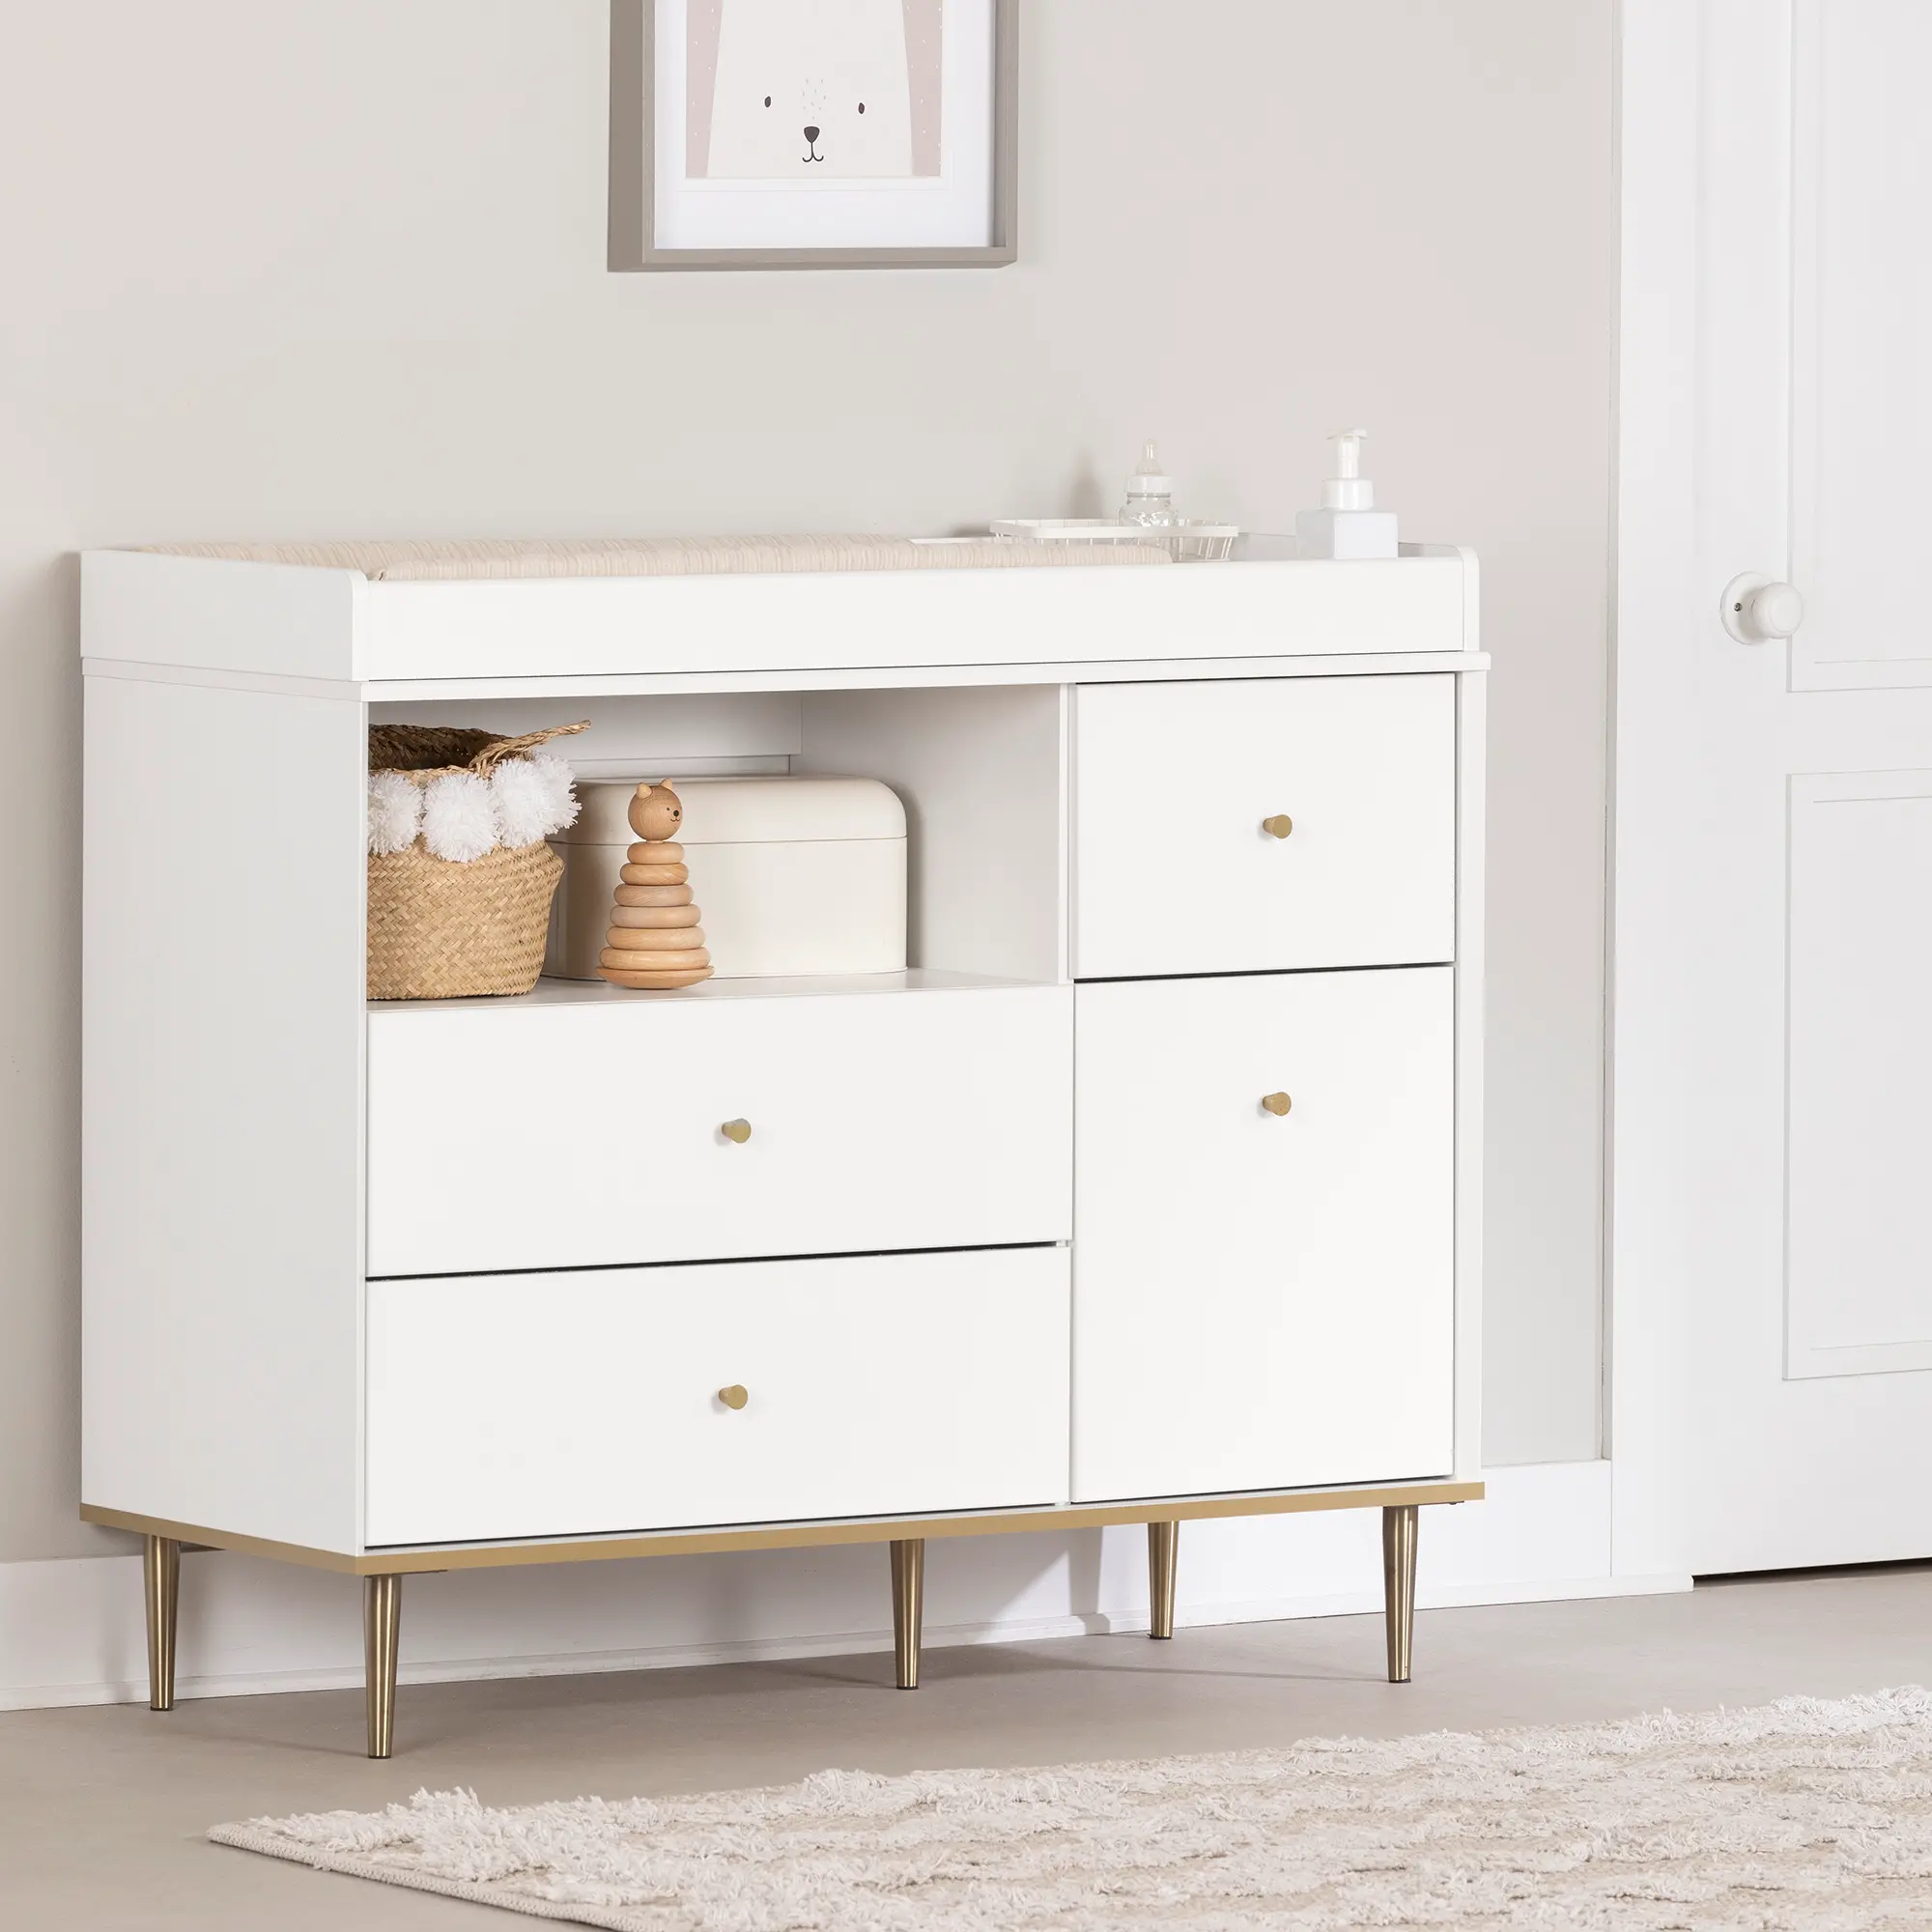 14202 Dylane White Changing Table with Storage - South S sku 14202